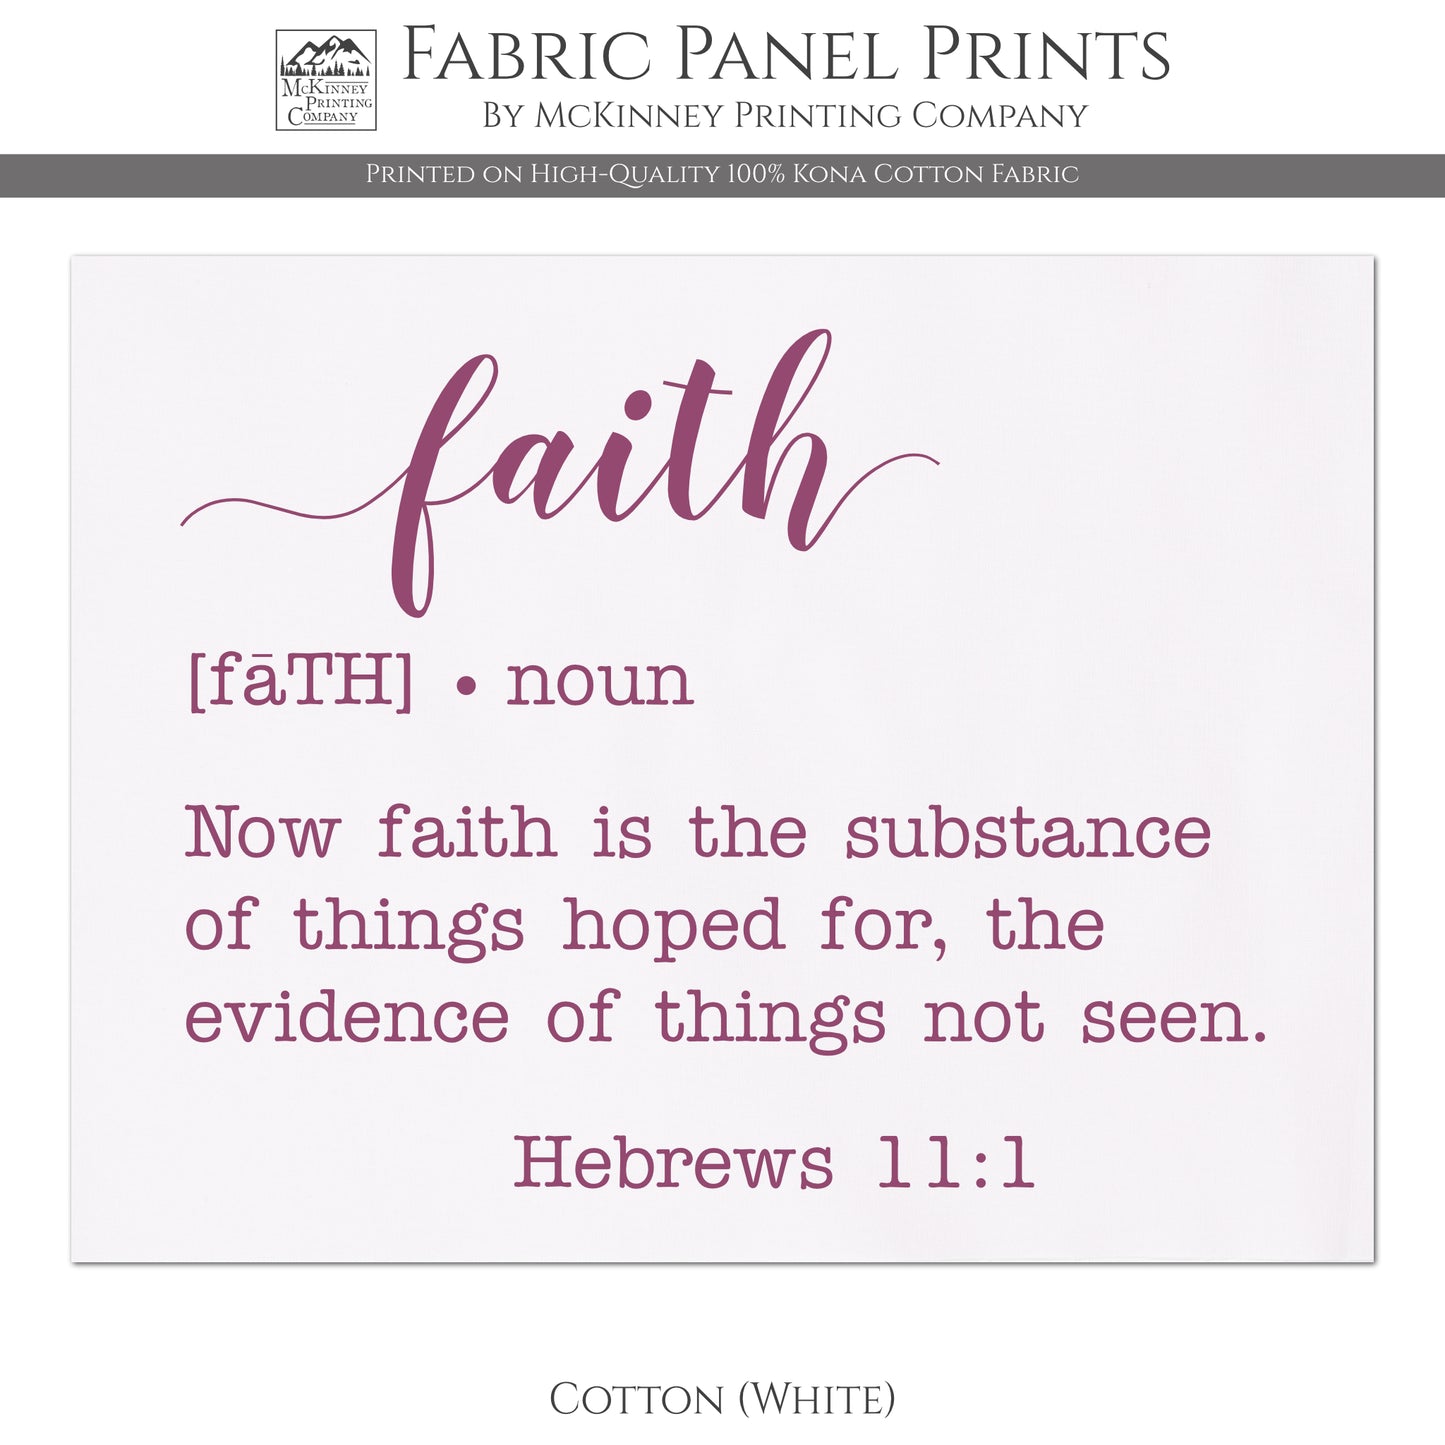 Faith Fabric - Now faith is the substance of things hoped for, the evidence of things not seen - Hebrews 11:1 - Quilting, Sewing - Cotton, White